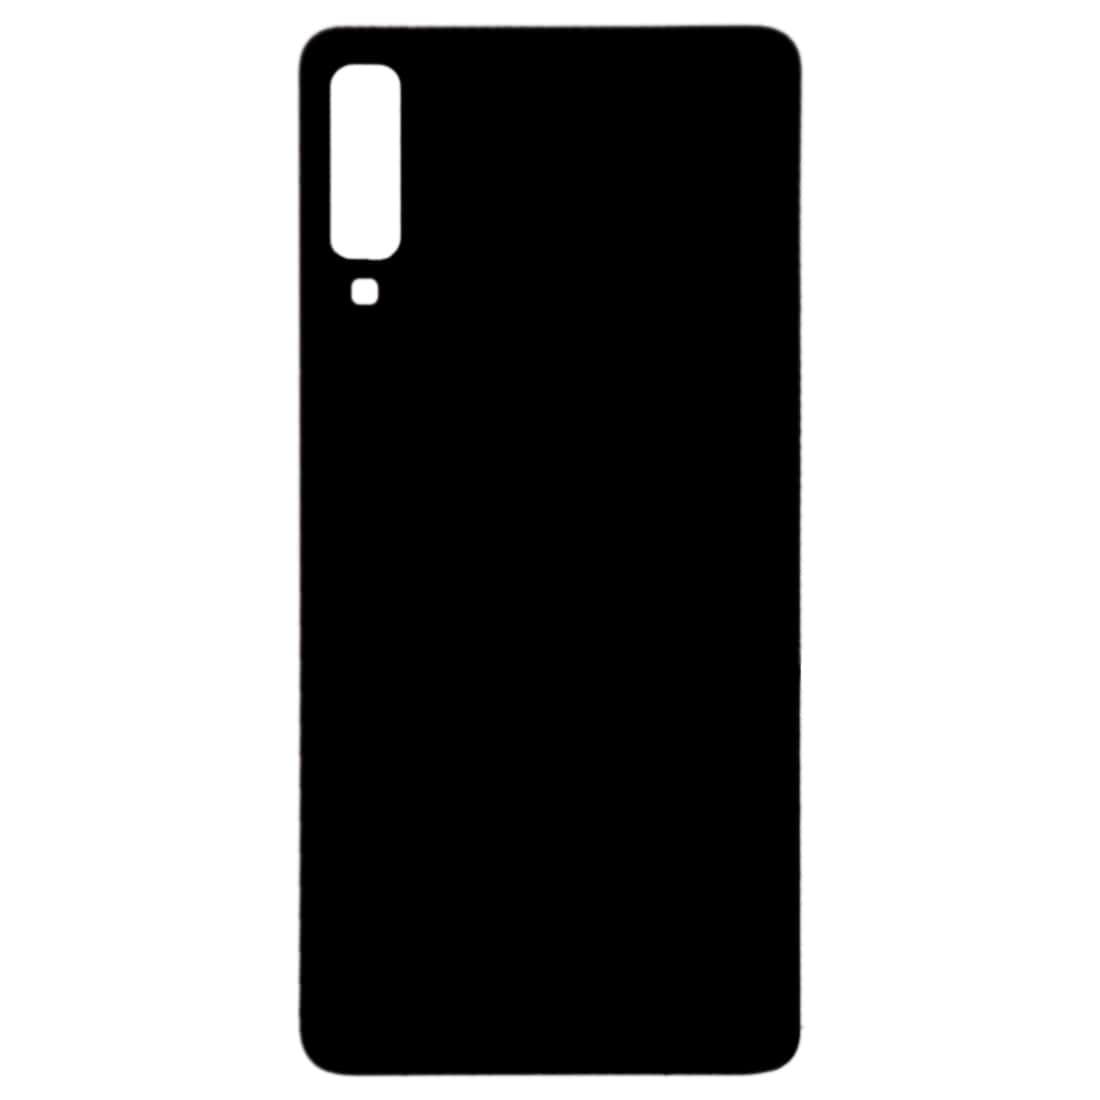 Back Glass Panel for  Samsung Galaxy A7 2018